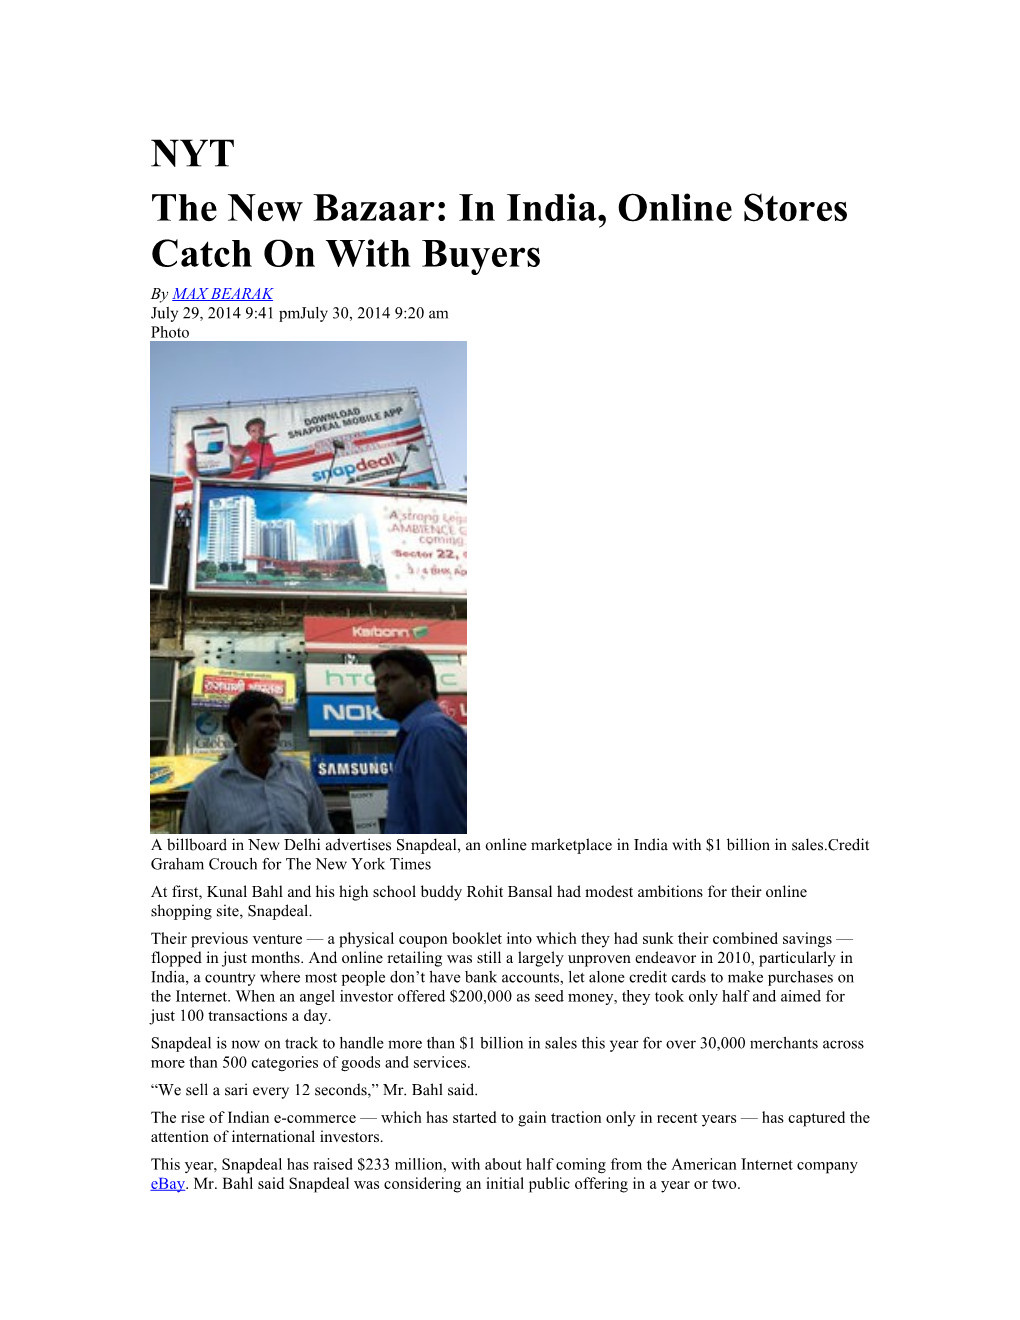 The New Bazaar: in India, Online Stores Catch on with Buyers